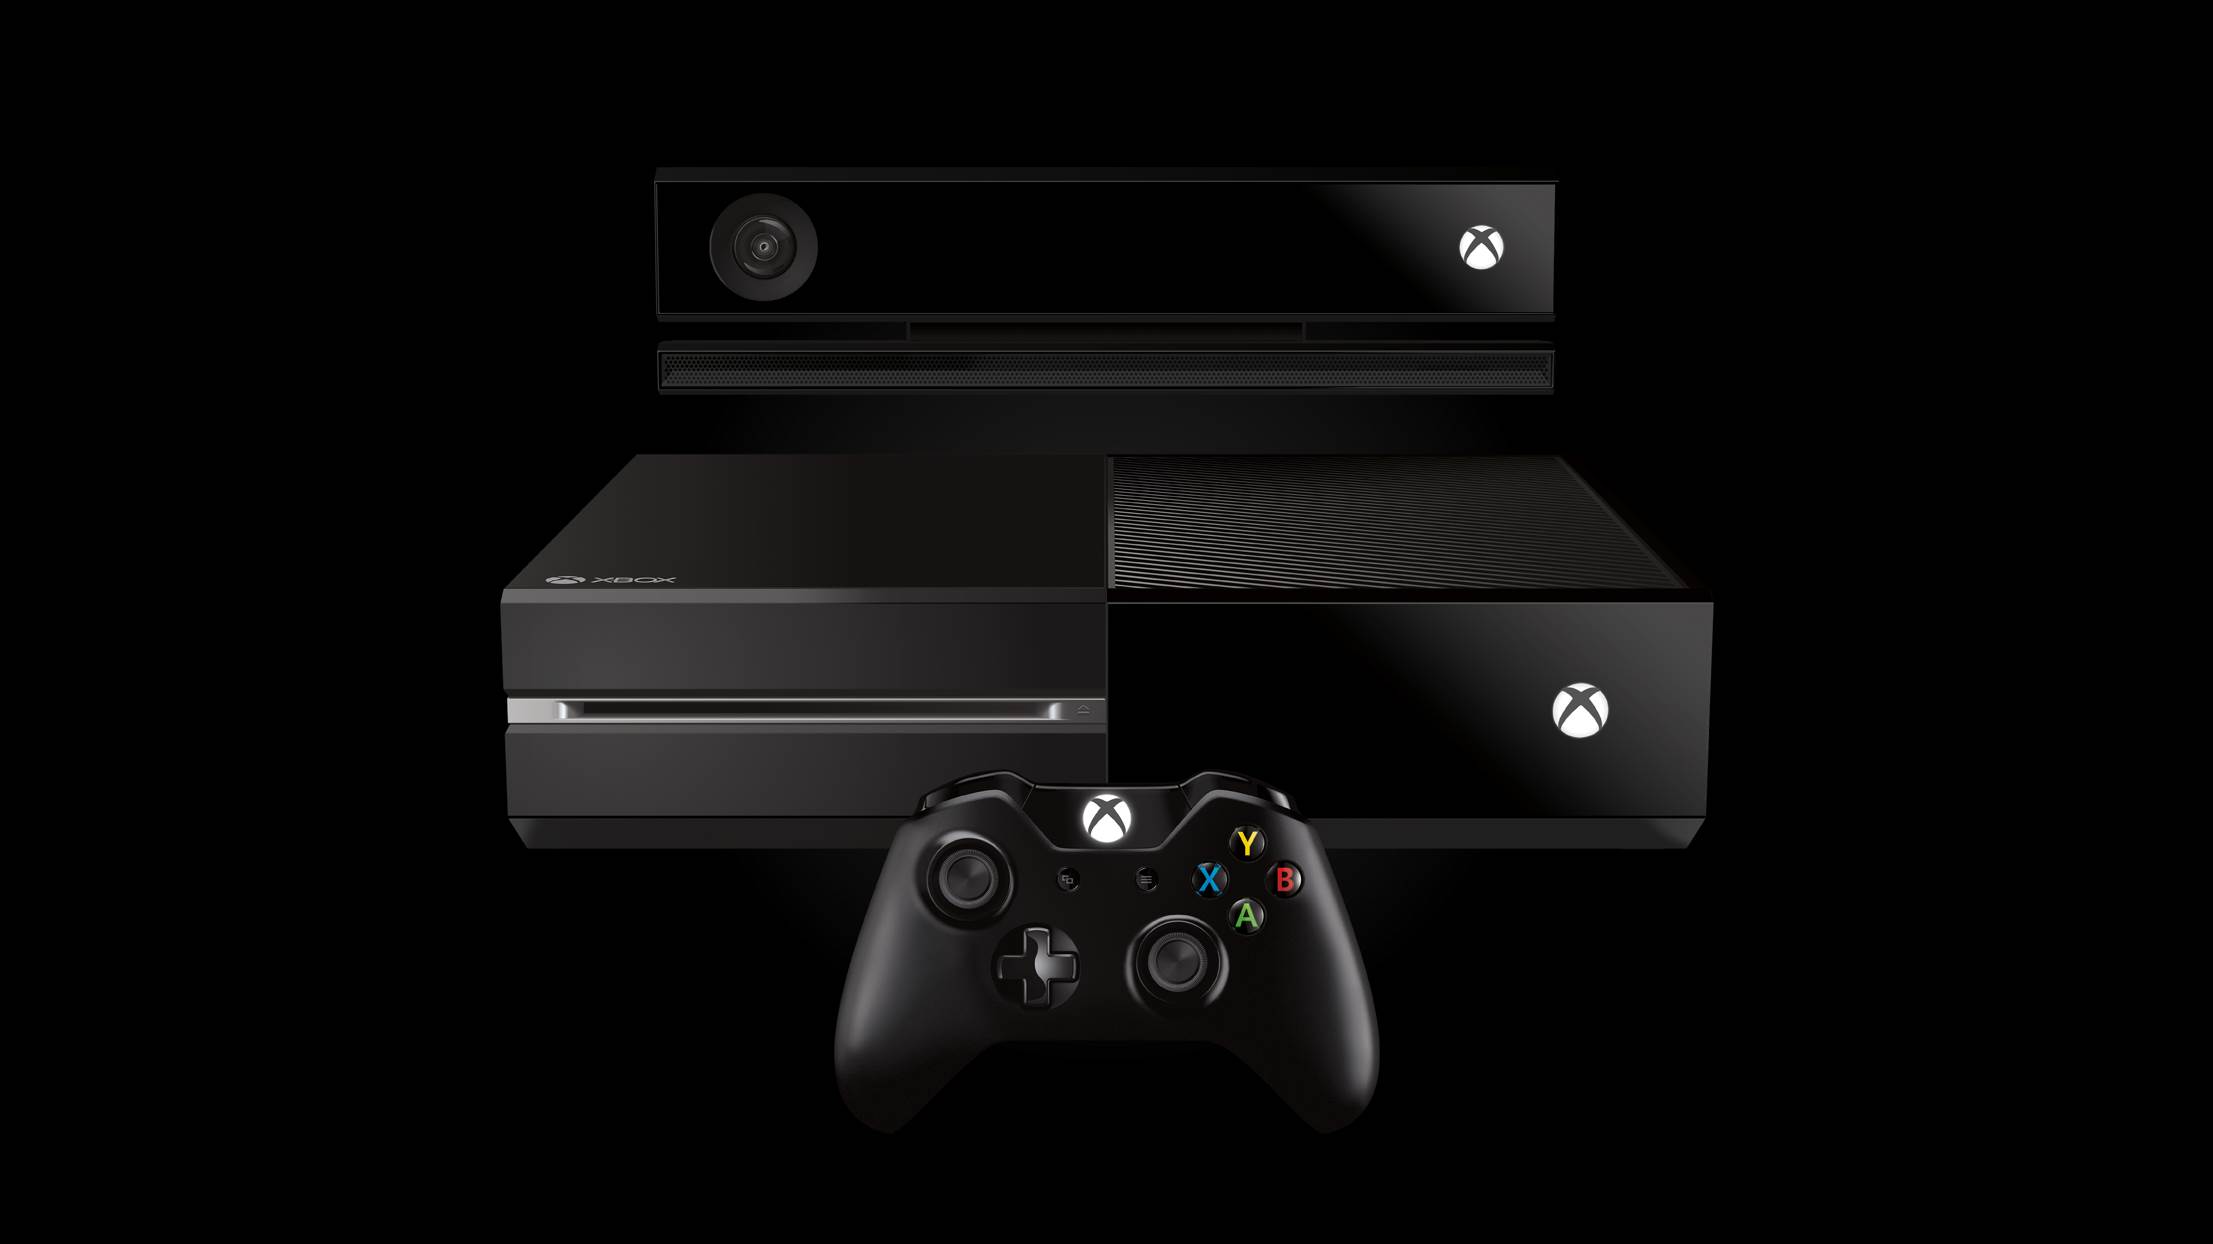 Xbox One Backgrounds 1080P